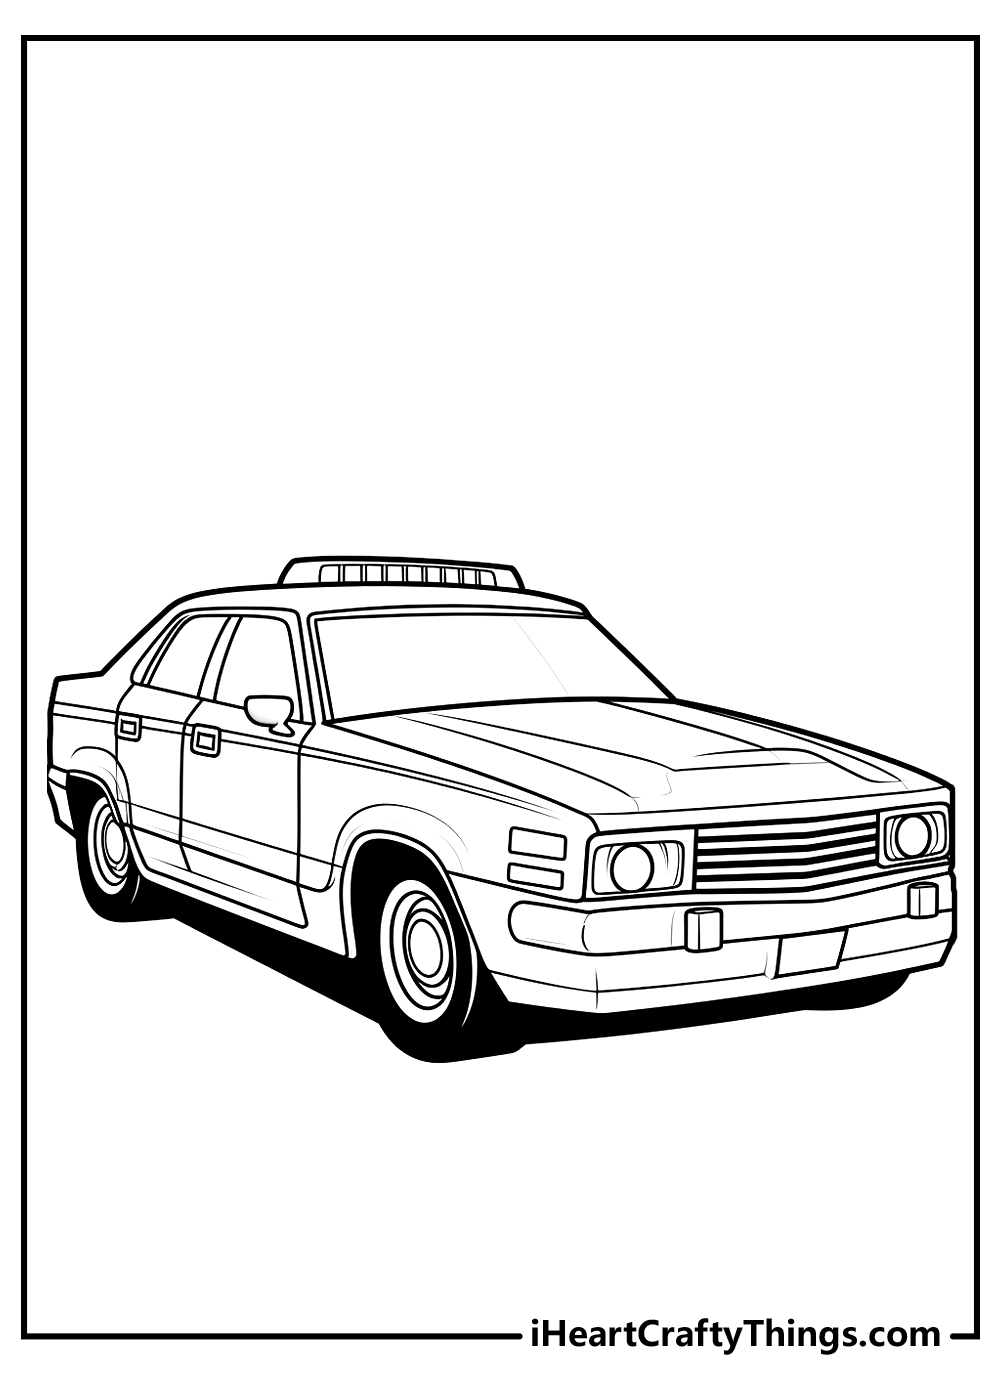 new police car coloring printable